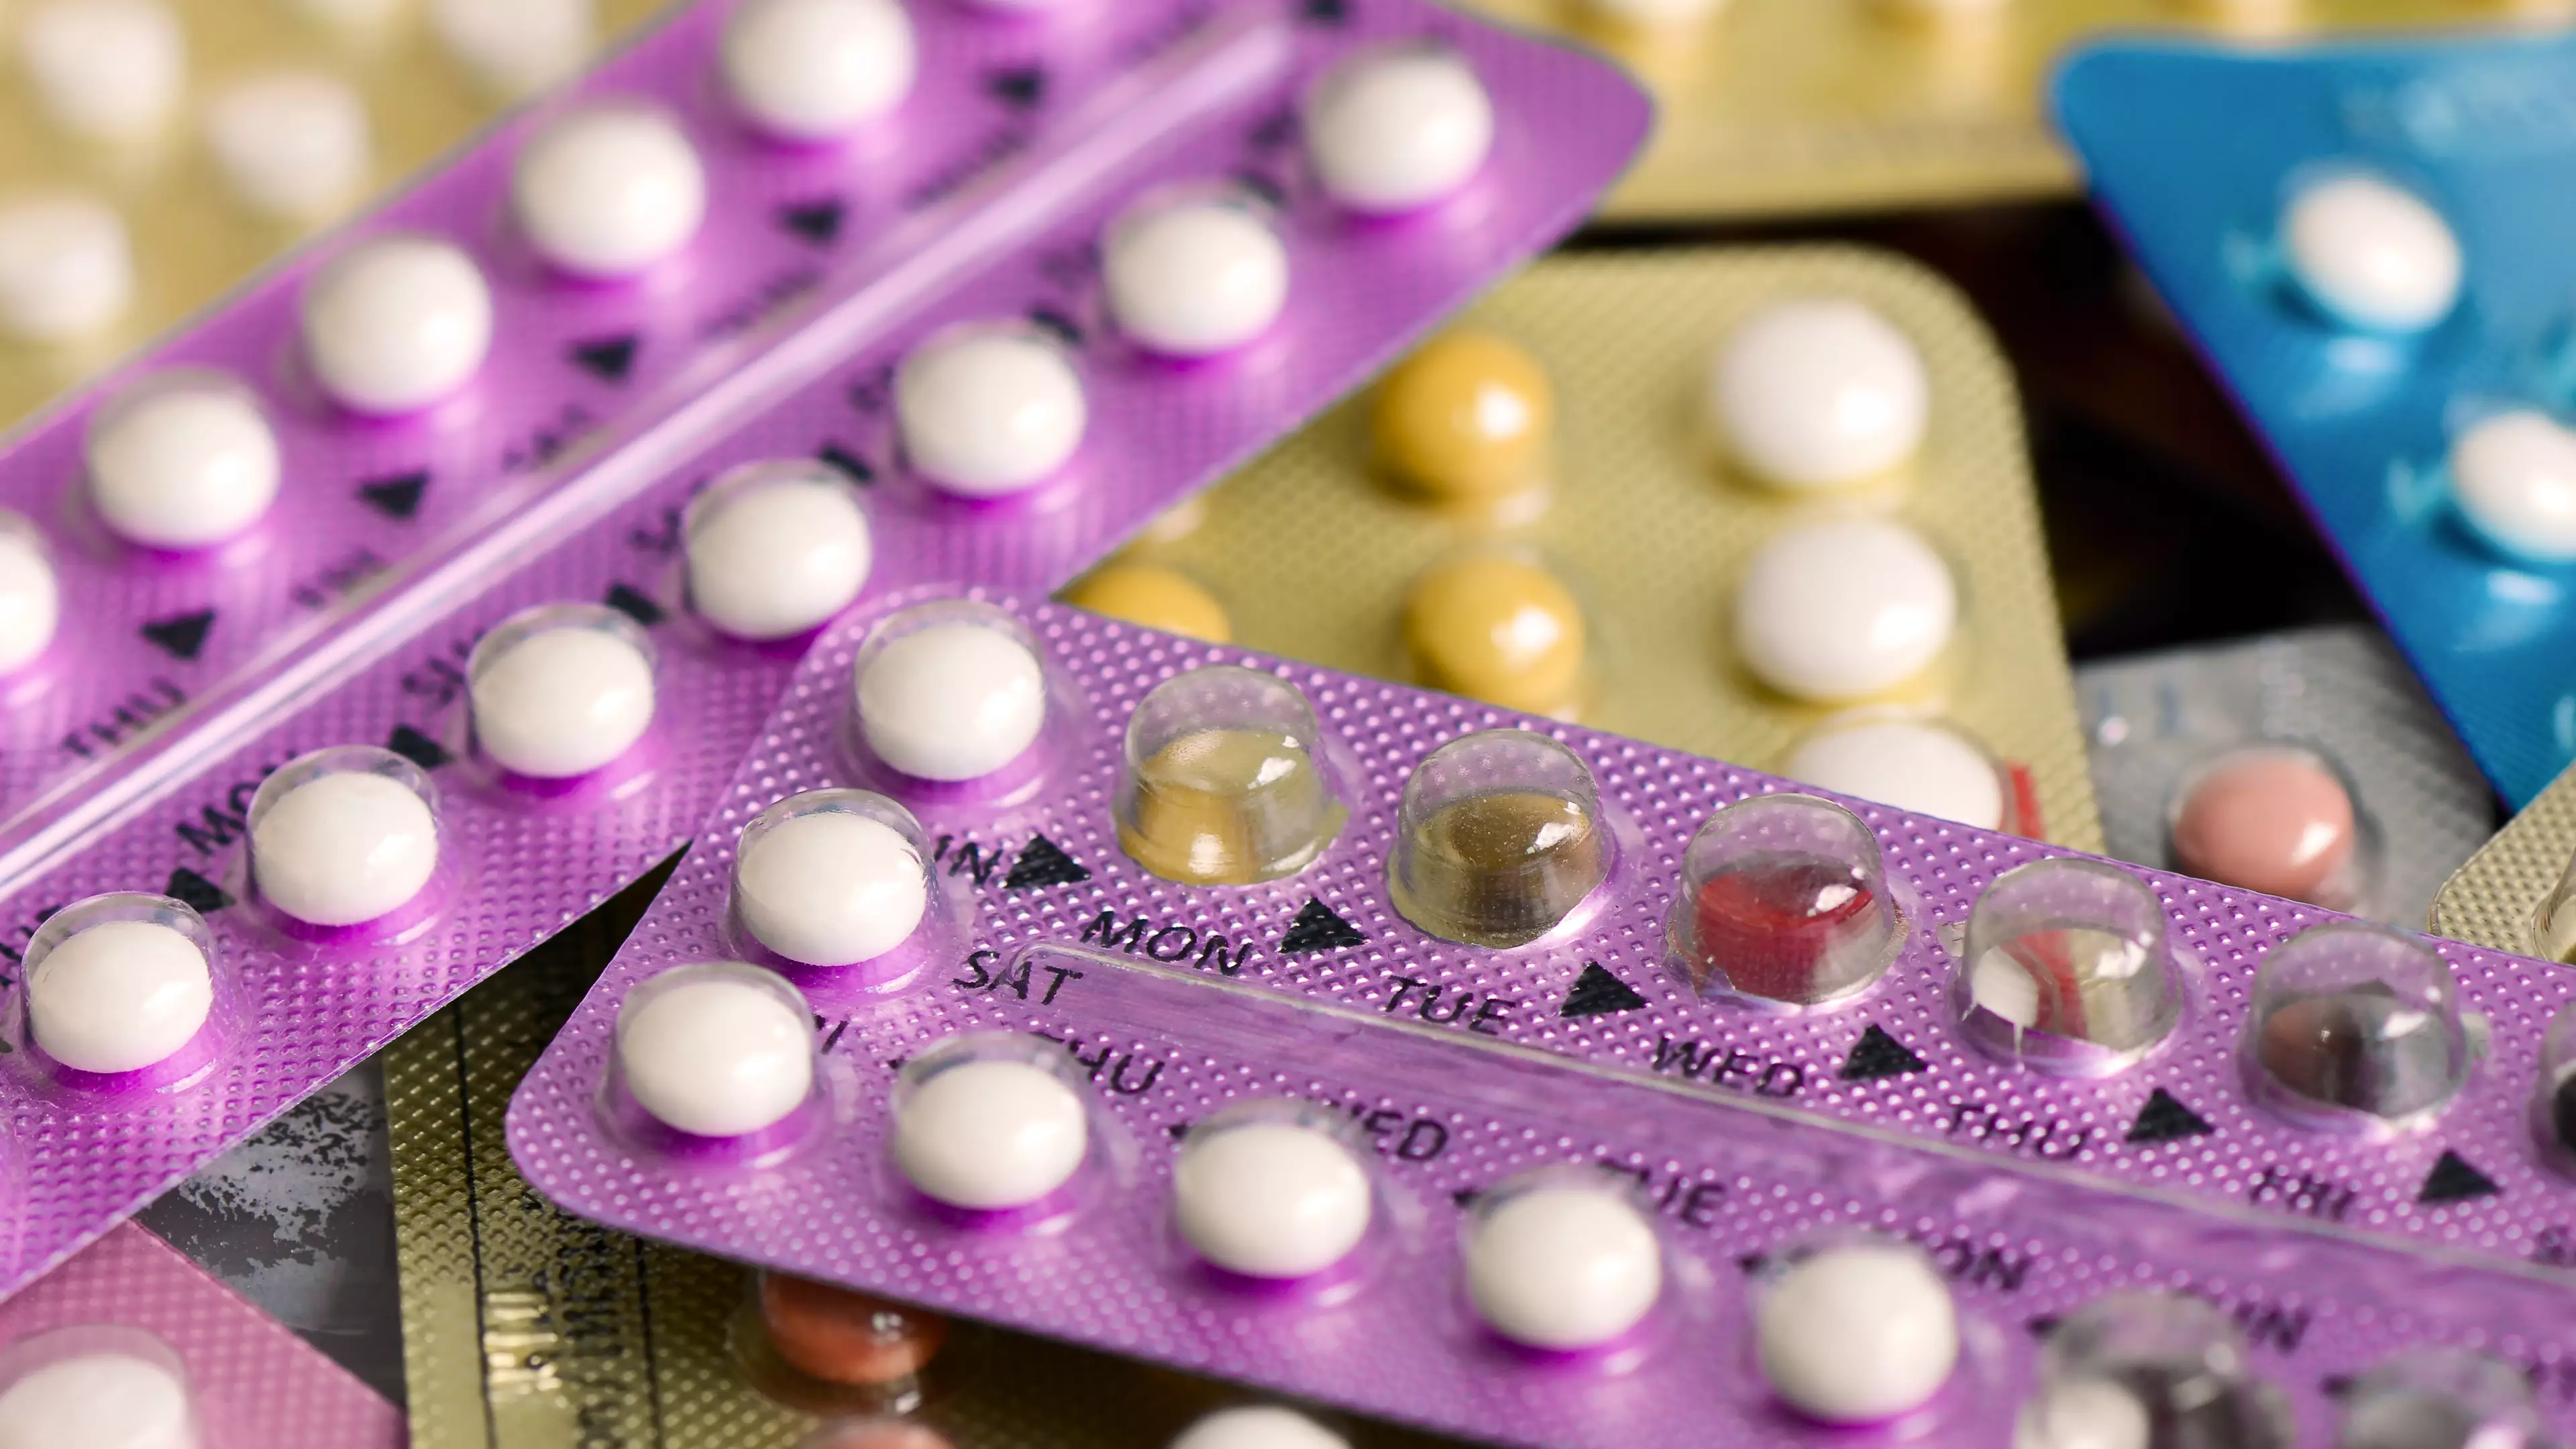 Professor said women under 30 are more likely to develop a blood clot as a result of taking the contraceptive pill (